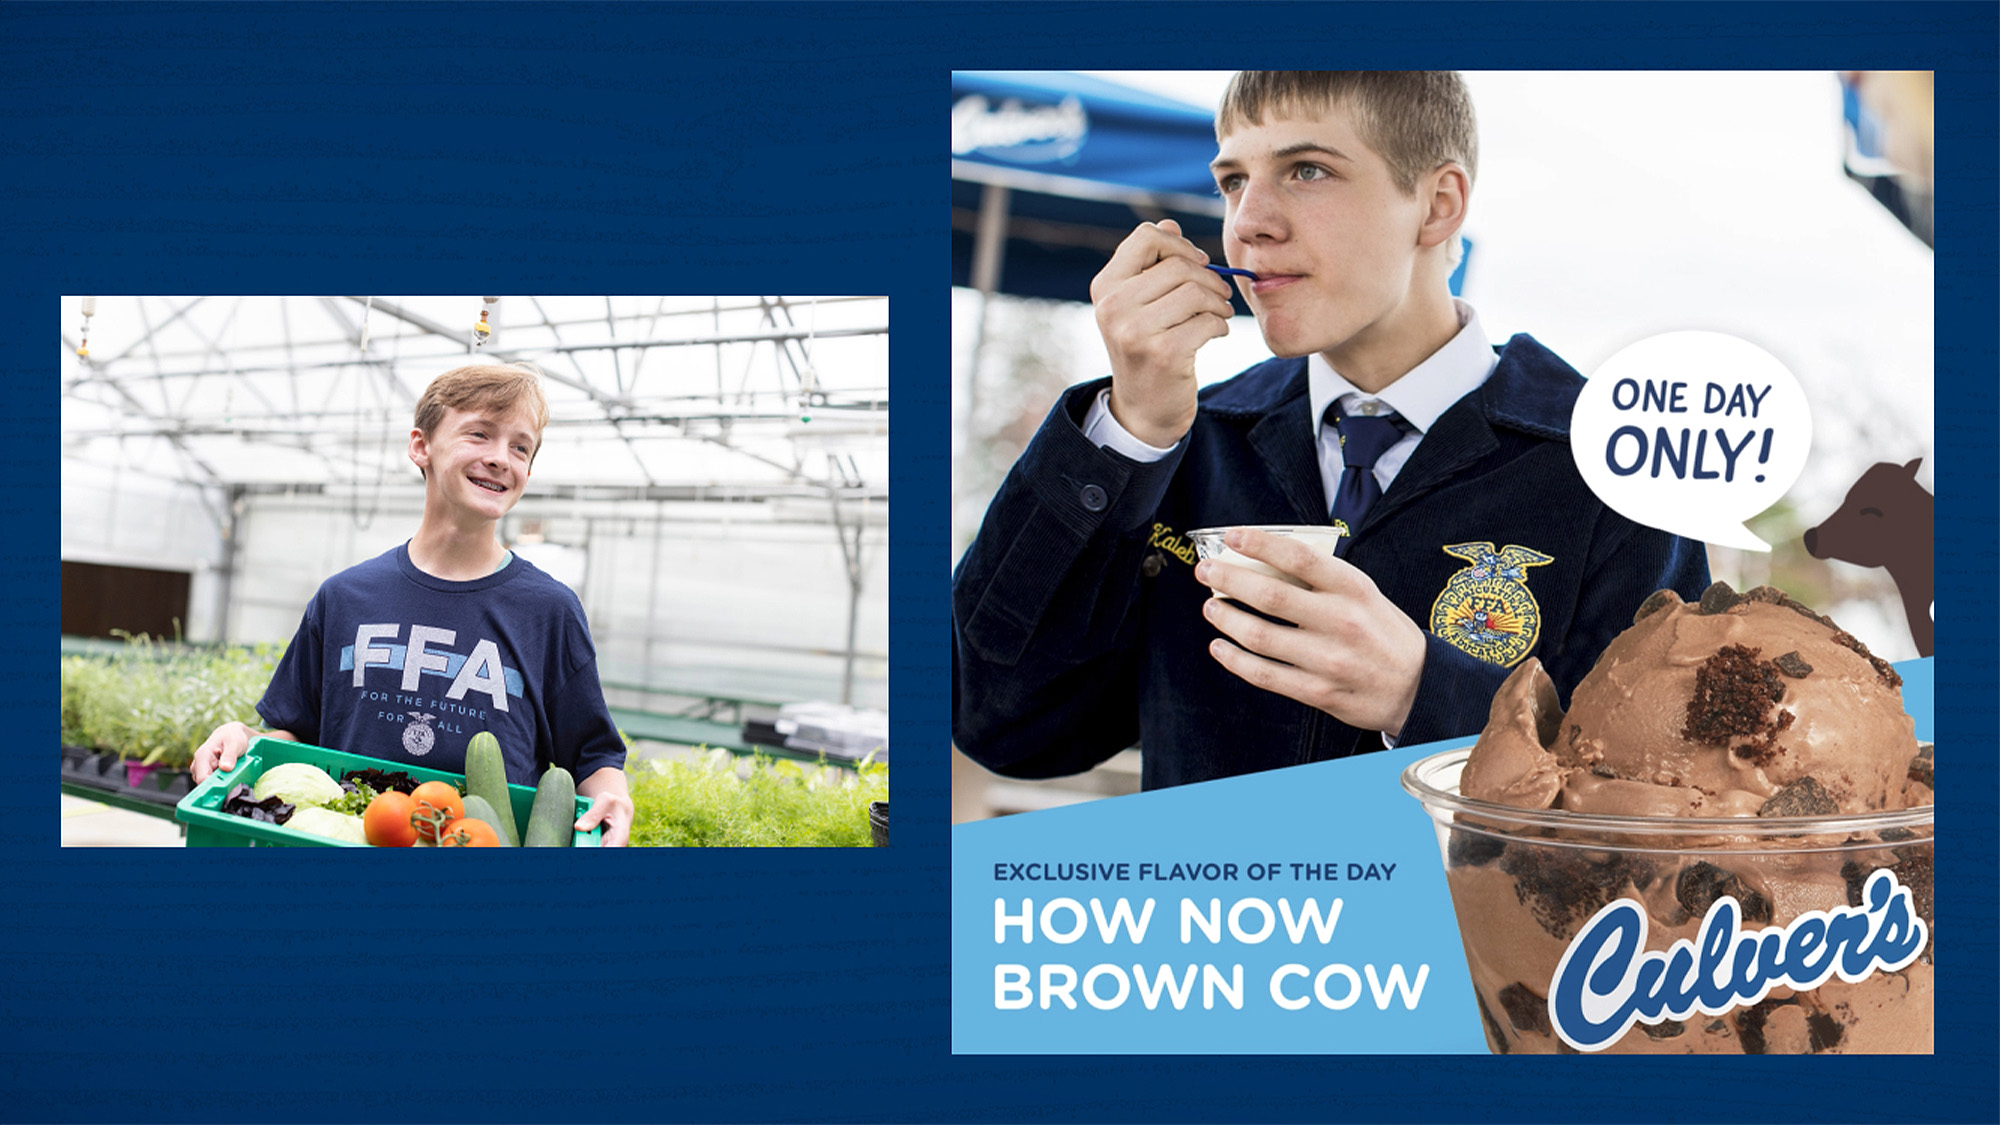 A fundraiser social post for Future Farmers of America, reading, "One day only! Exclusive flavor of the day, how now brown now."